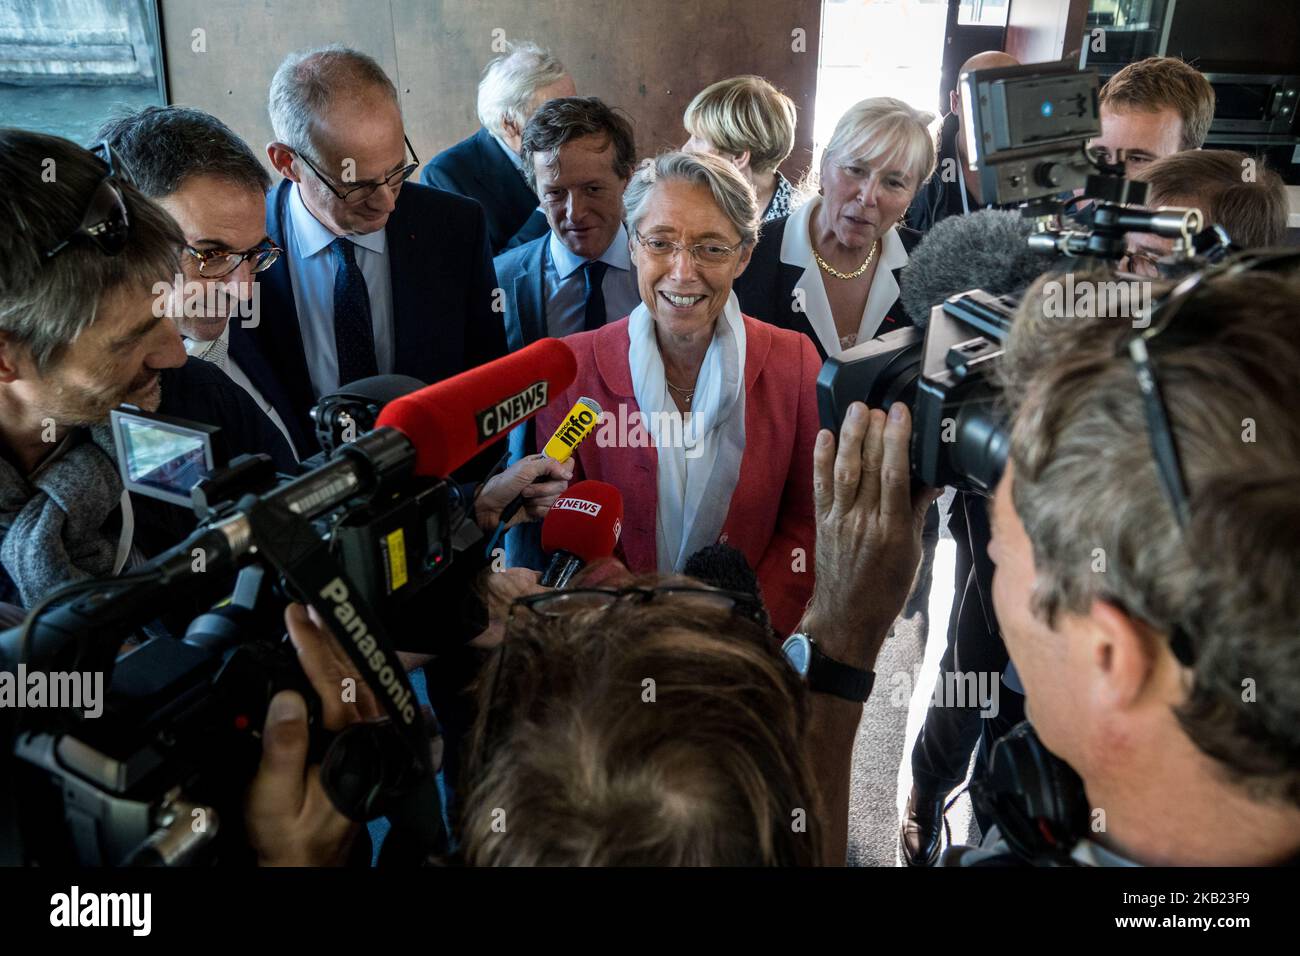 French Transports Minister Elisabeth Borne speaks to press during her visit to the port on the occasion of the 80th anniversary of the creation of the Edouard Herriot port in Lyon, France, on 12 October 2018. (Photo by Nicolas Liponne/NurPhoto) Stock Photo